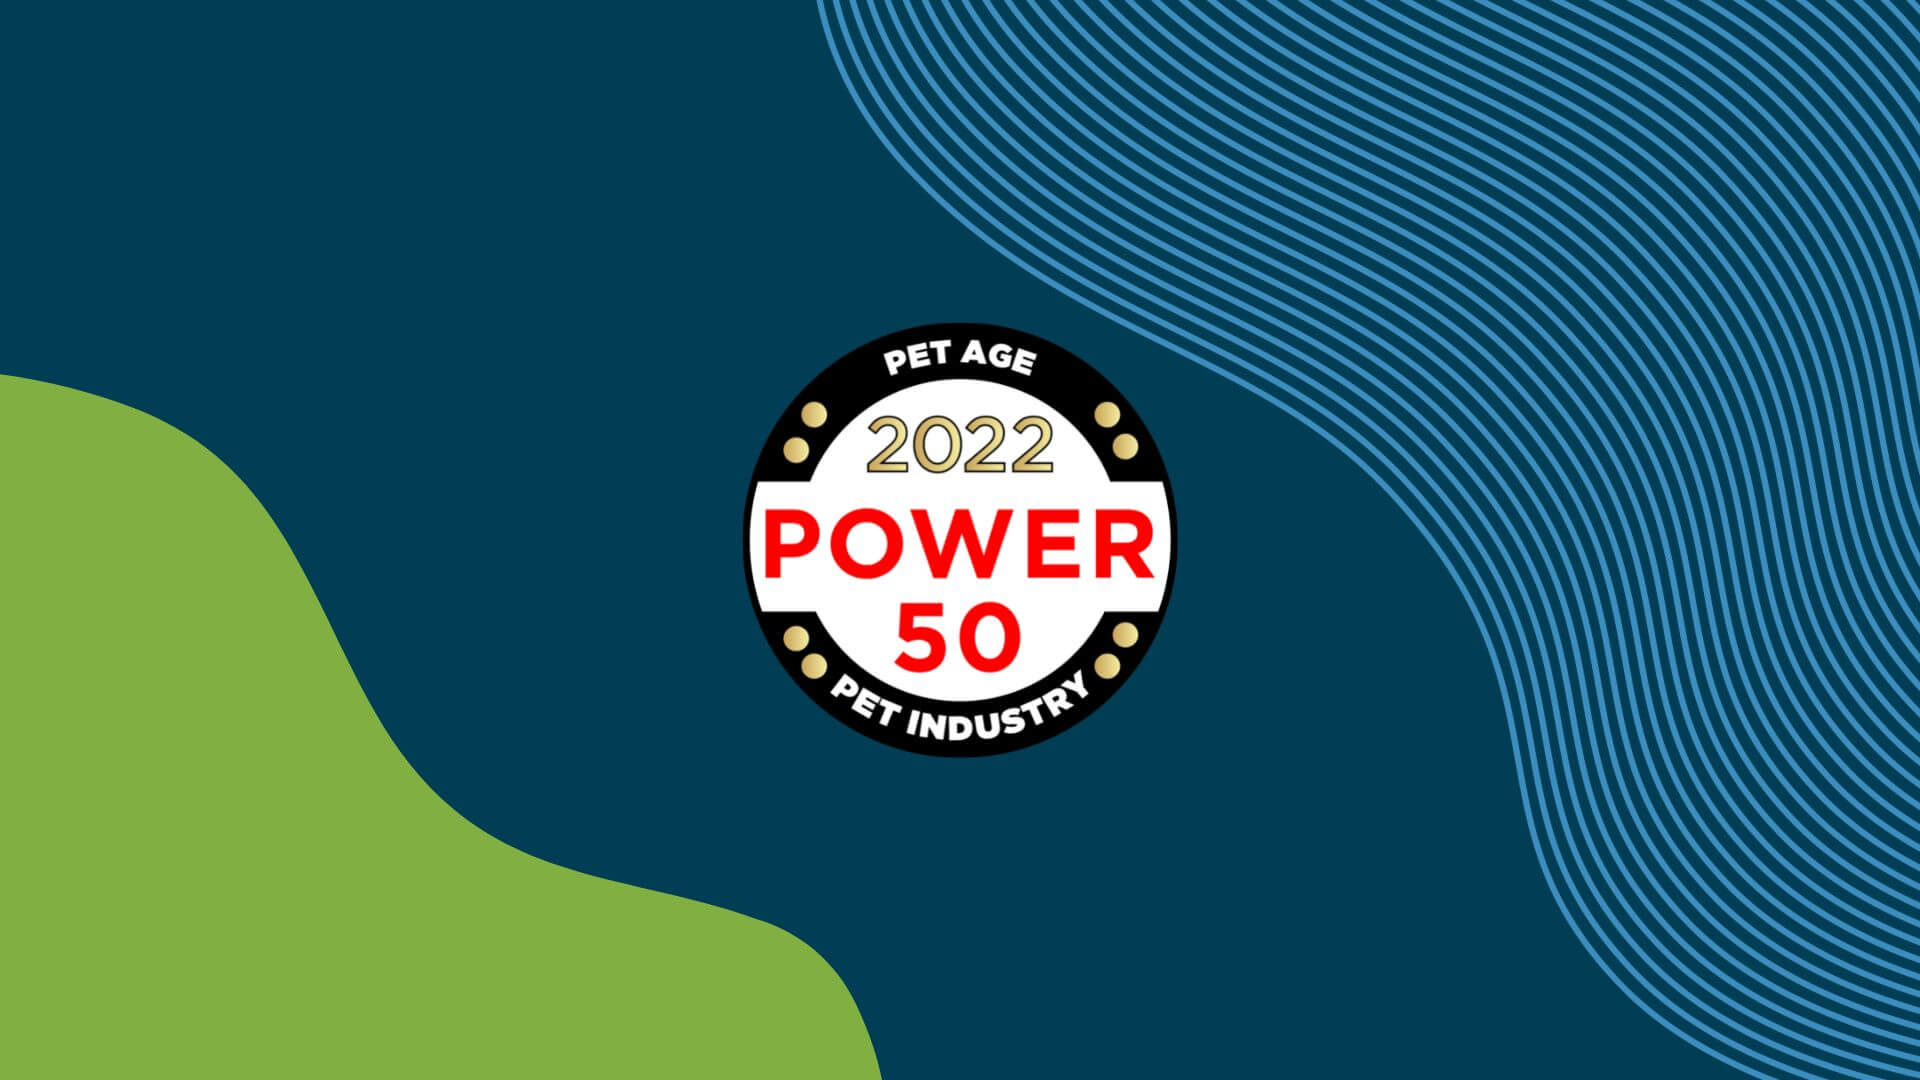 Pet Age Names Michael Baker Among Power 50 for Second Consecutive Year